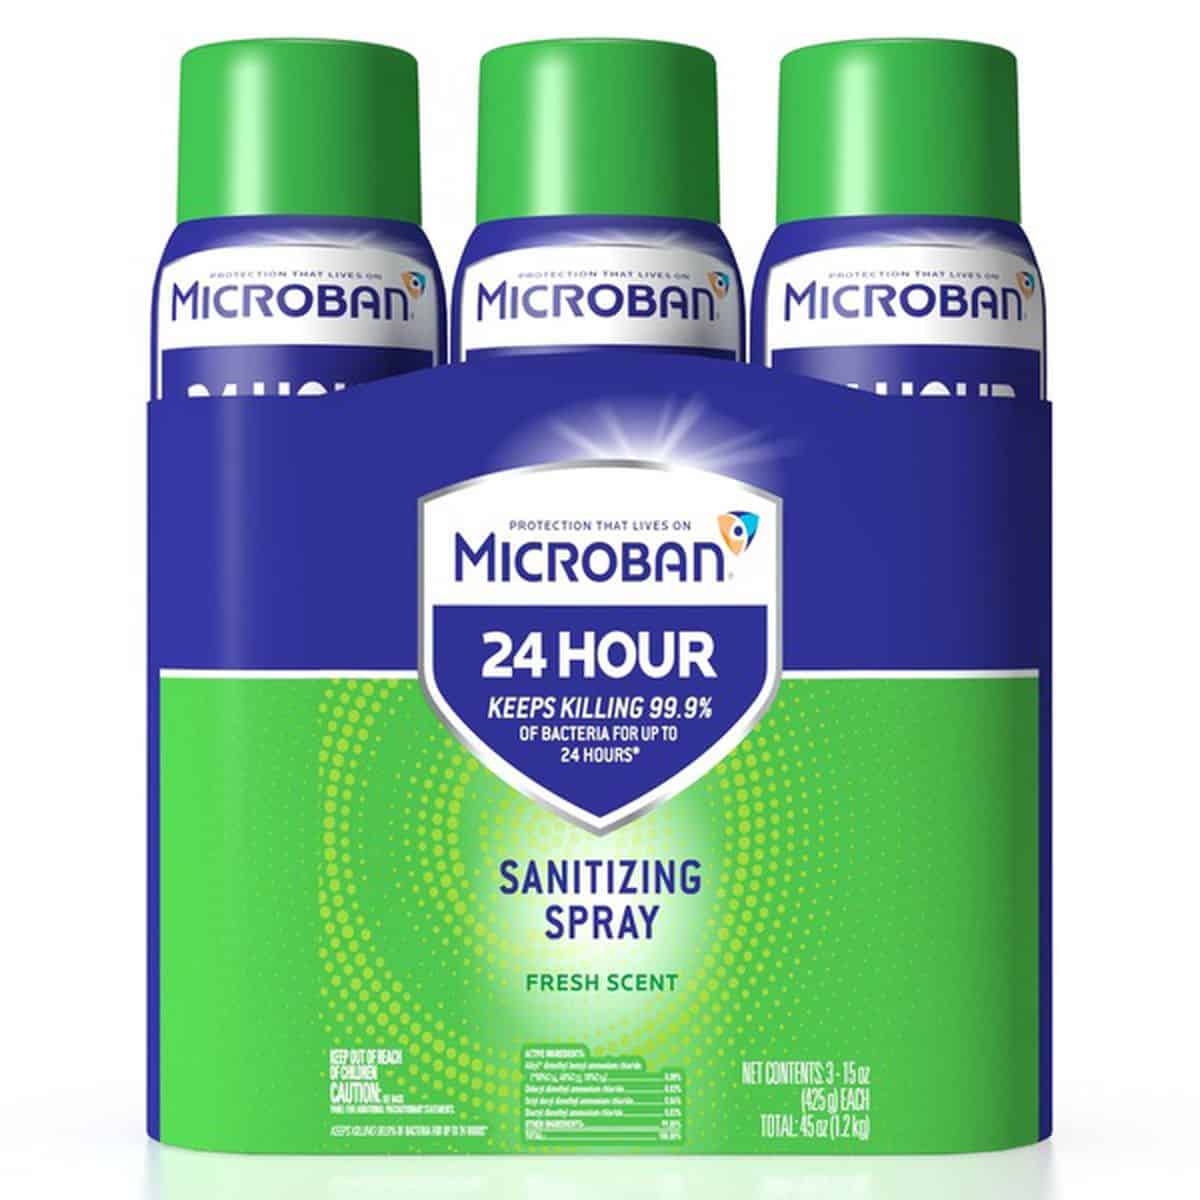 Microban 24 Hour Disinfectant Sanitizing Spray, 45 Oz (Pack of 3)